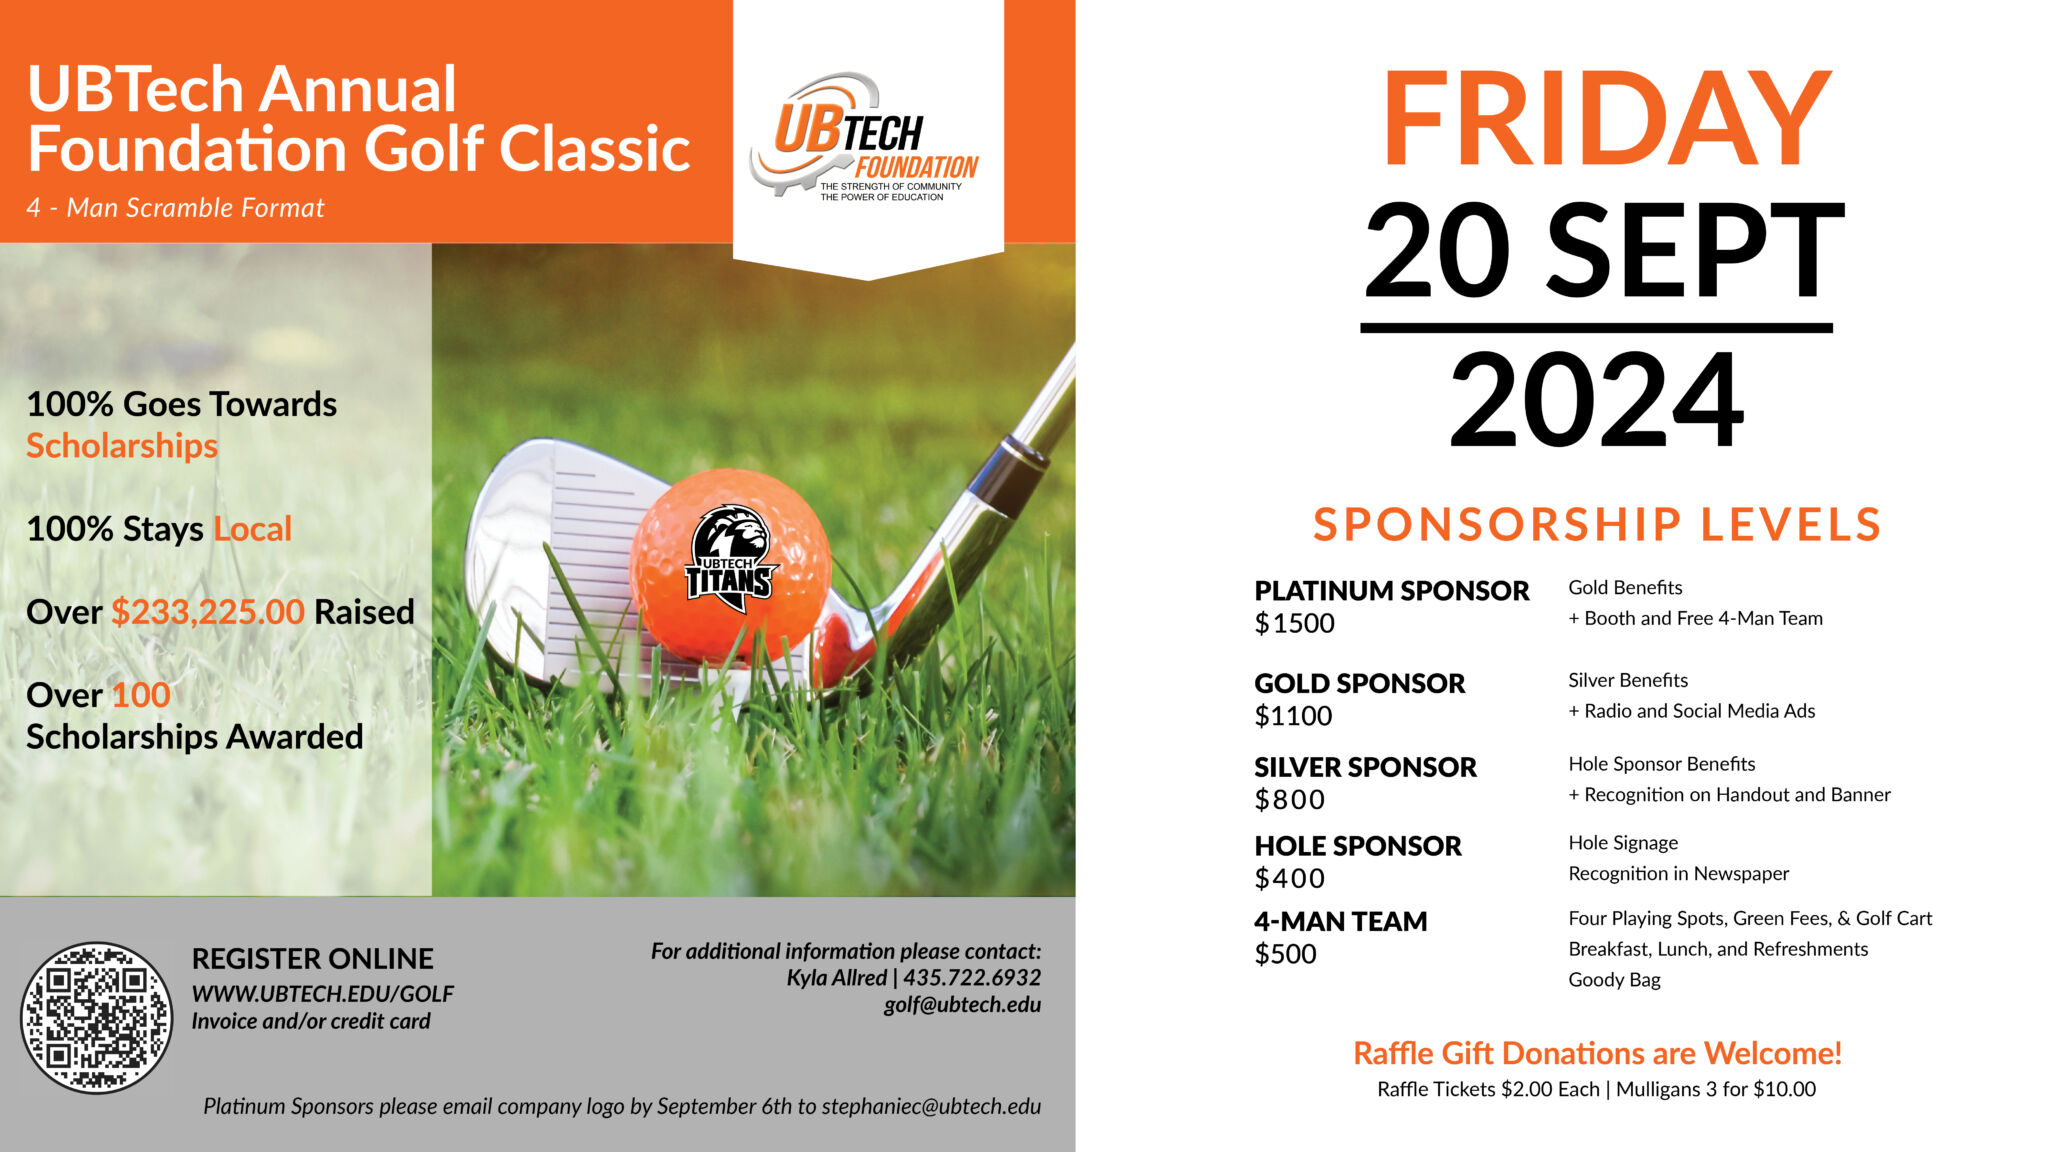 UBTech Annual Foundation Golf Classic. September 23rd 2023. 4-man scramble format. 100% goes towards scholarships. 100% stays local. Over $100,000 raised. Over 50 scholarships awarded. Sponsorship levels: Platinum ($1500; includes gold benefits plus a booth and a free 4-man team), Gold ($1100; Silver benefits plus radio and social media ads), Silver ($800; Hole sponsor benefits, recognition on handout and banner), Hole Sponsor ($400; Hole signage and Recognition in Newspaper), 4-man team ($500; Four playing spots and golf cart, meals and refreshments, Goody bag). Raffle donations welcome! Raffle tickets are $2.00 each and Mulligans are three for $10.00. Register online at www.ubtech.edu/golf